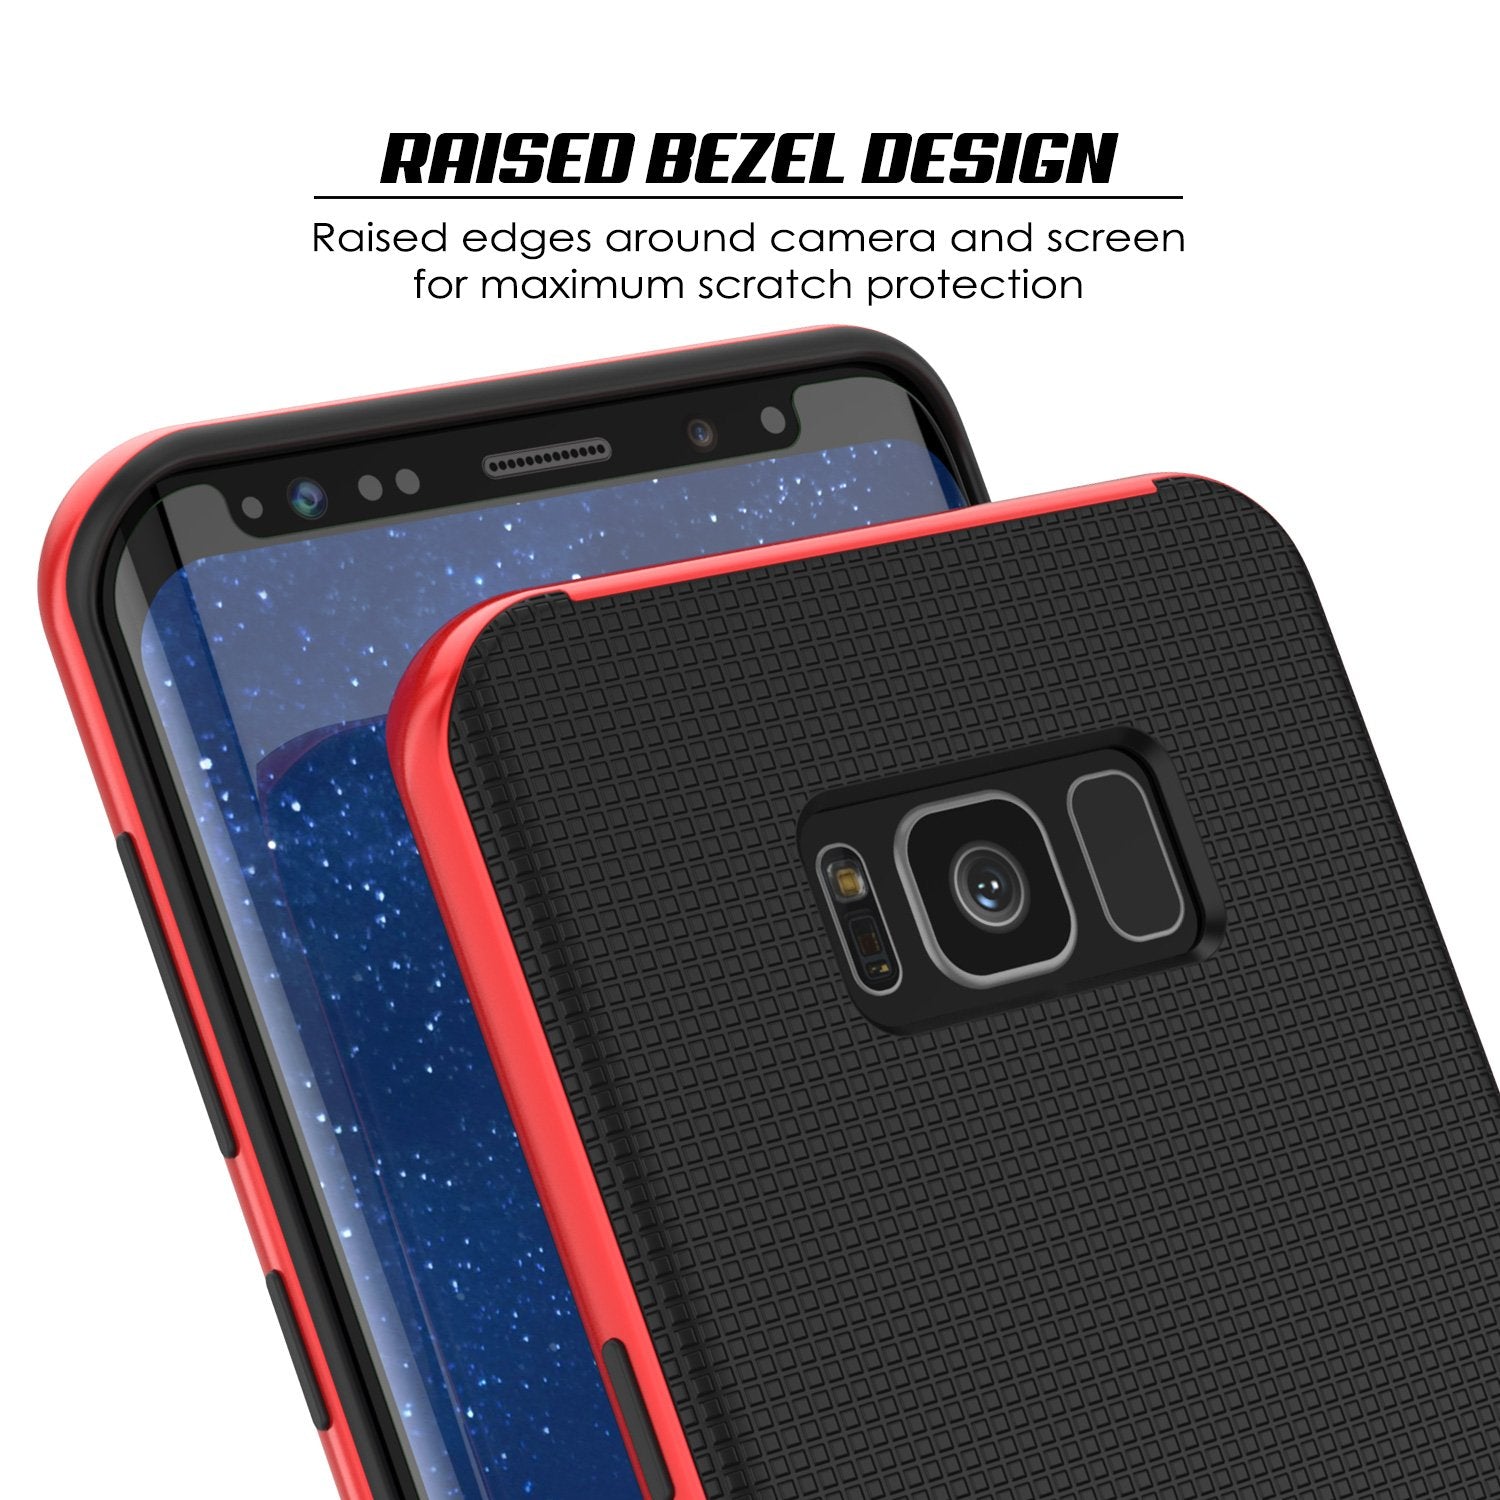 Galaxy S8 Case, PunkCase Stealth Series Hybrid Shockproof Red Cover